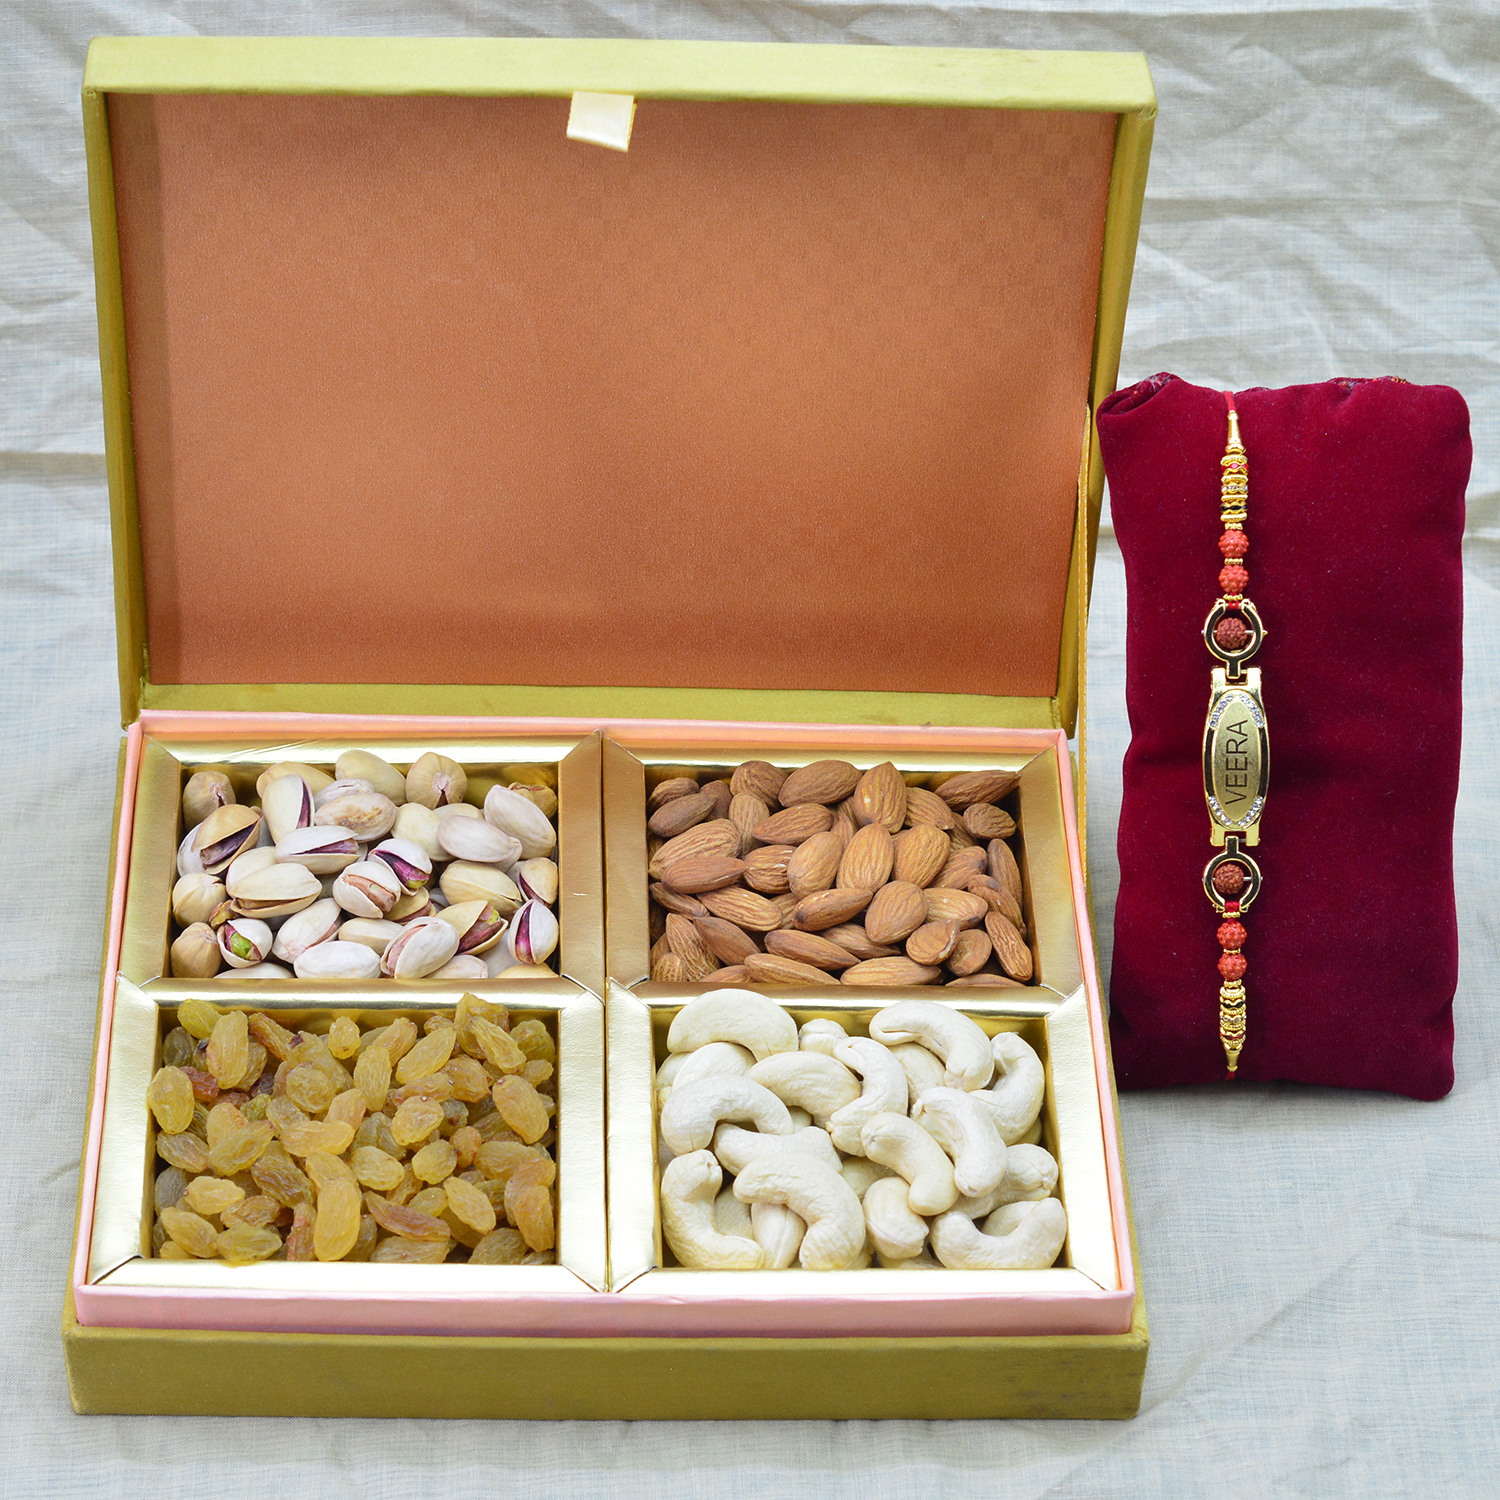 Veera Written Golden Brother Rakhi with Dry Fruits of 4 Different Types